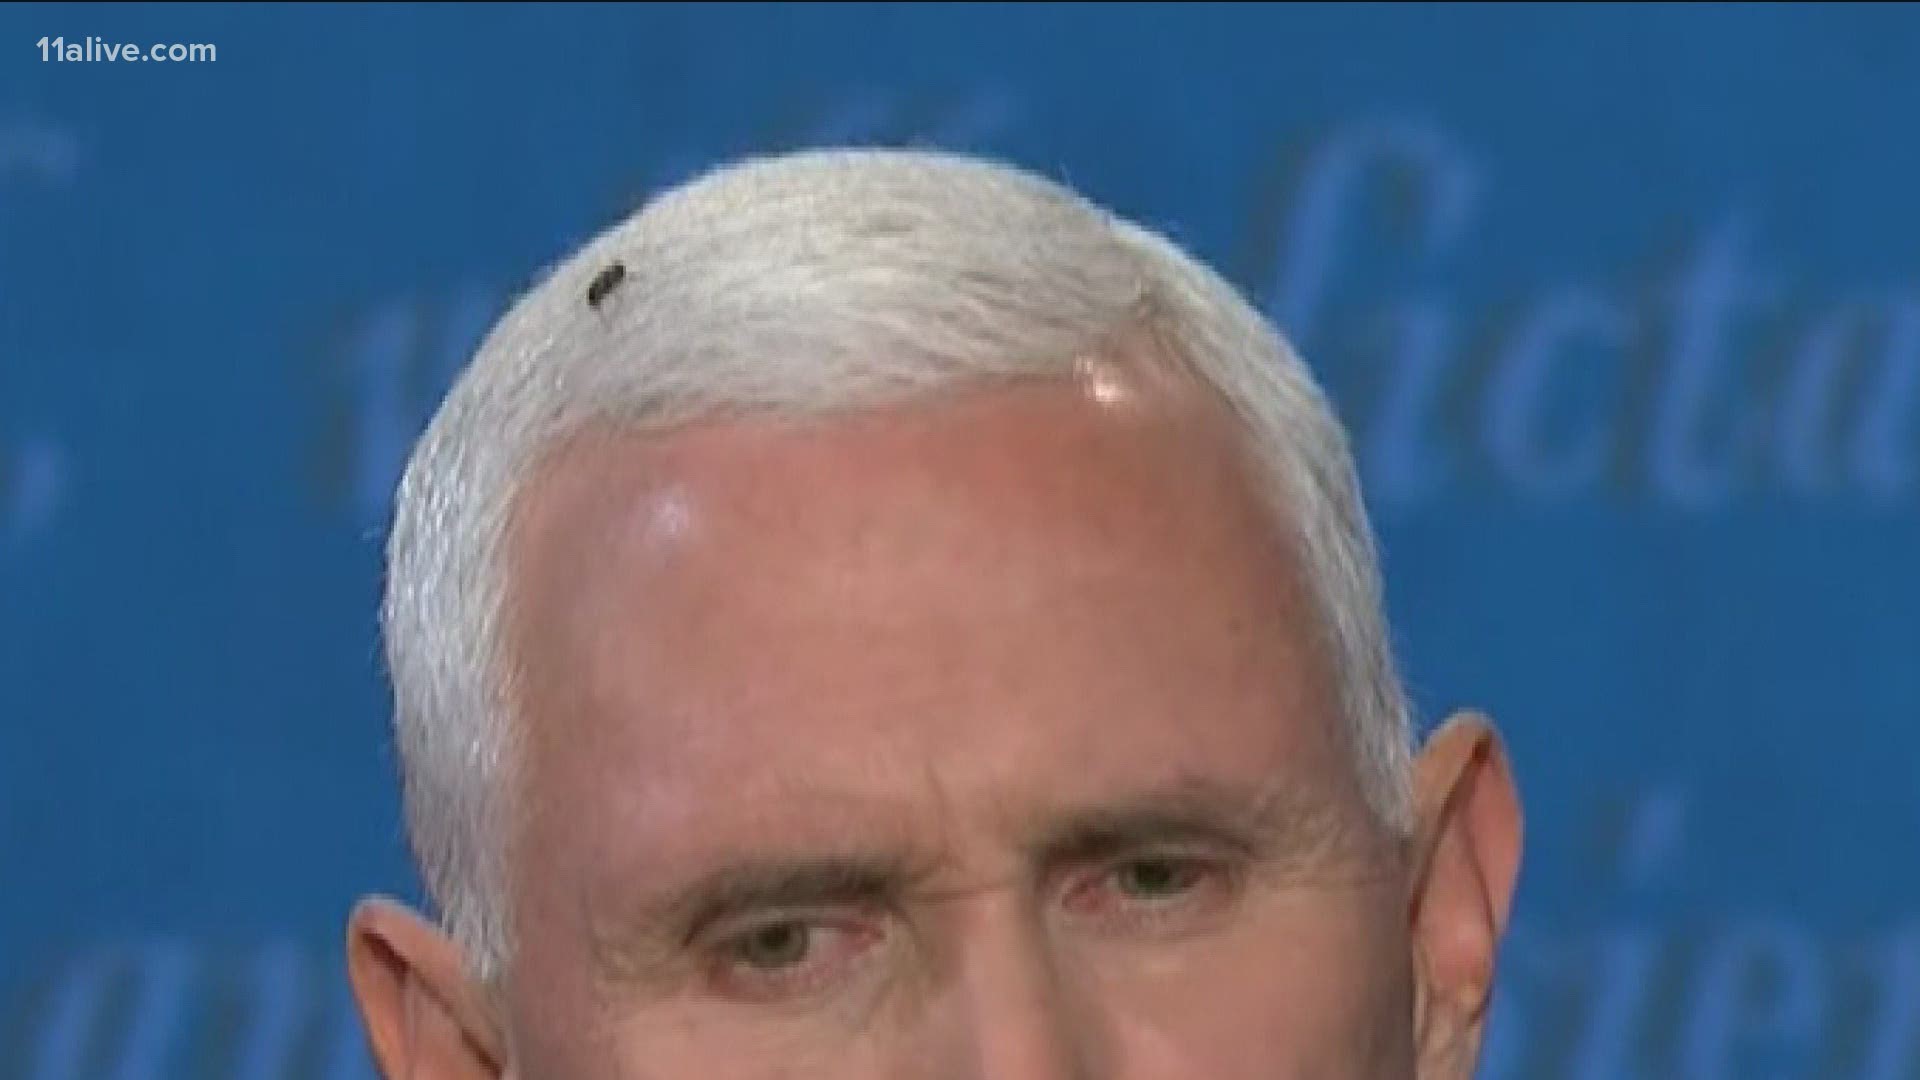 The Fly In The Room Bug Lands On Mike Pence S Head During Debate